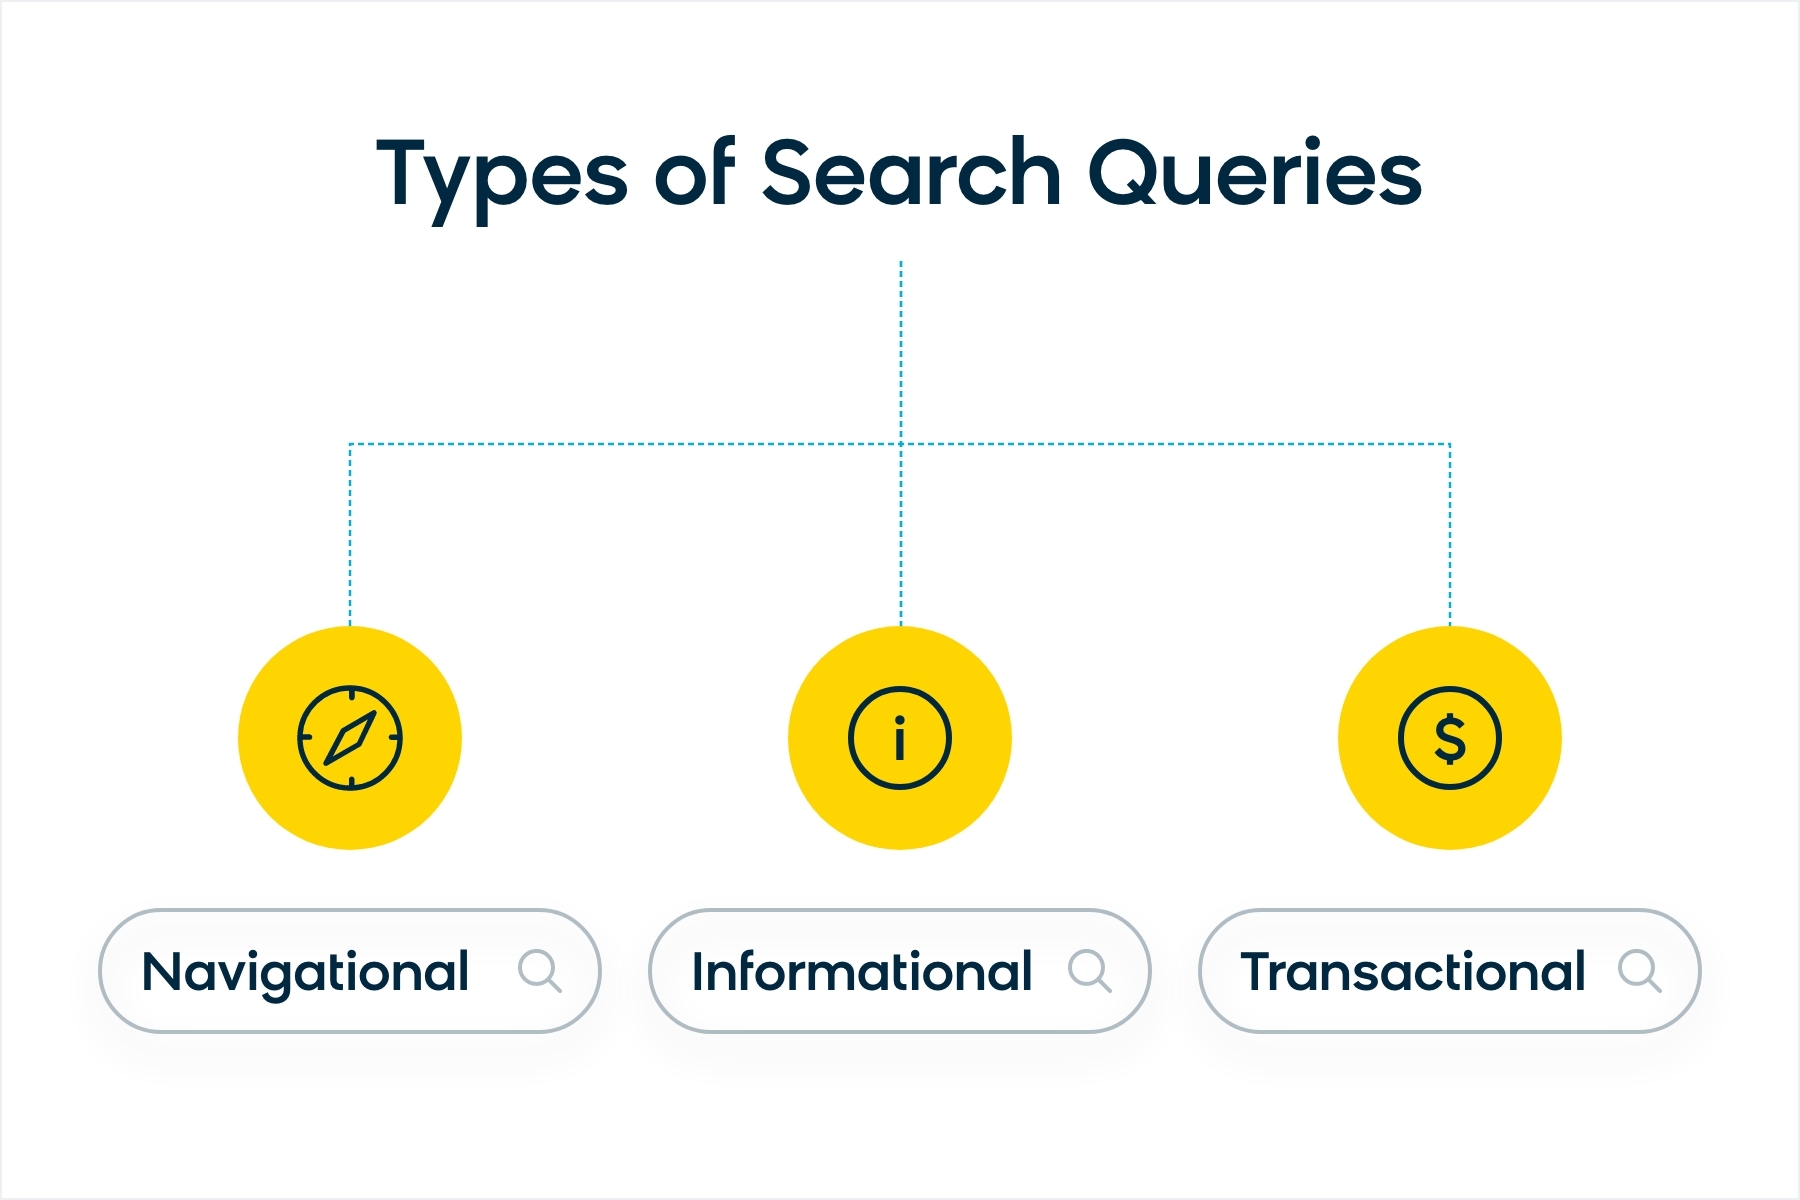 Types of Search Queries That Relate to E-Commerce